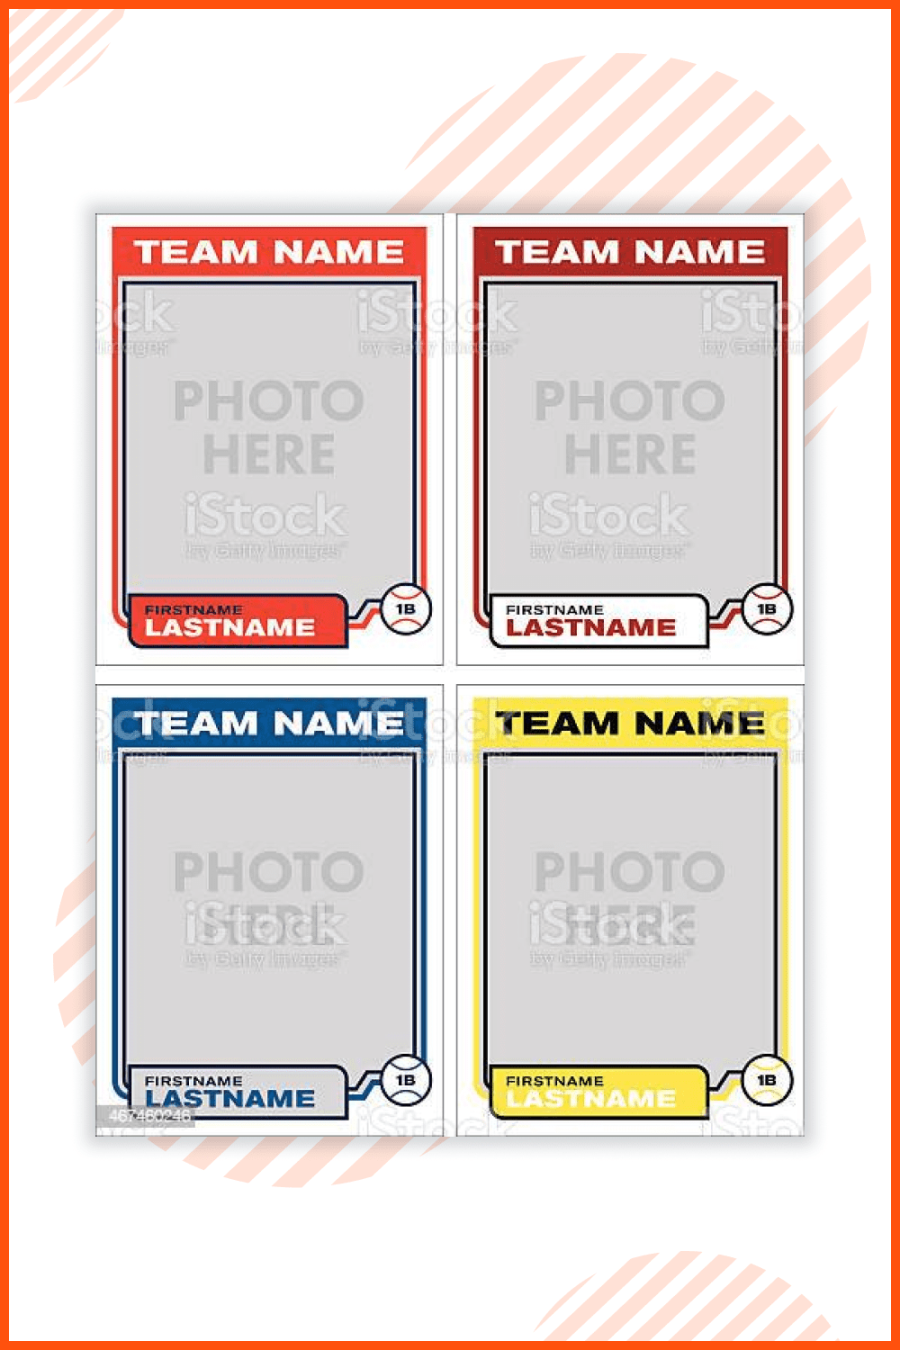 + Best Trading Card Templates for 23: Free and Premium